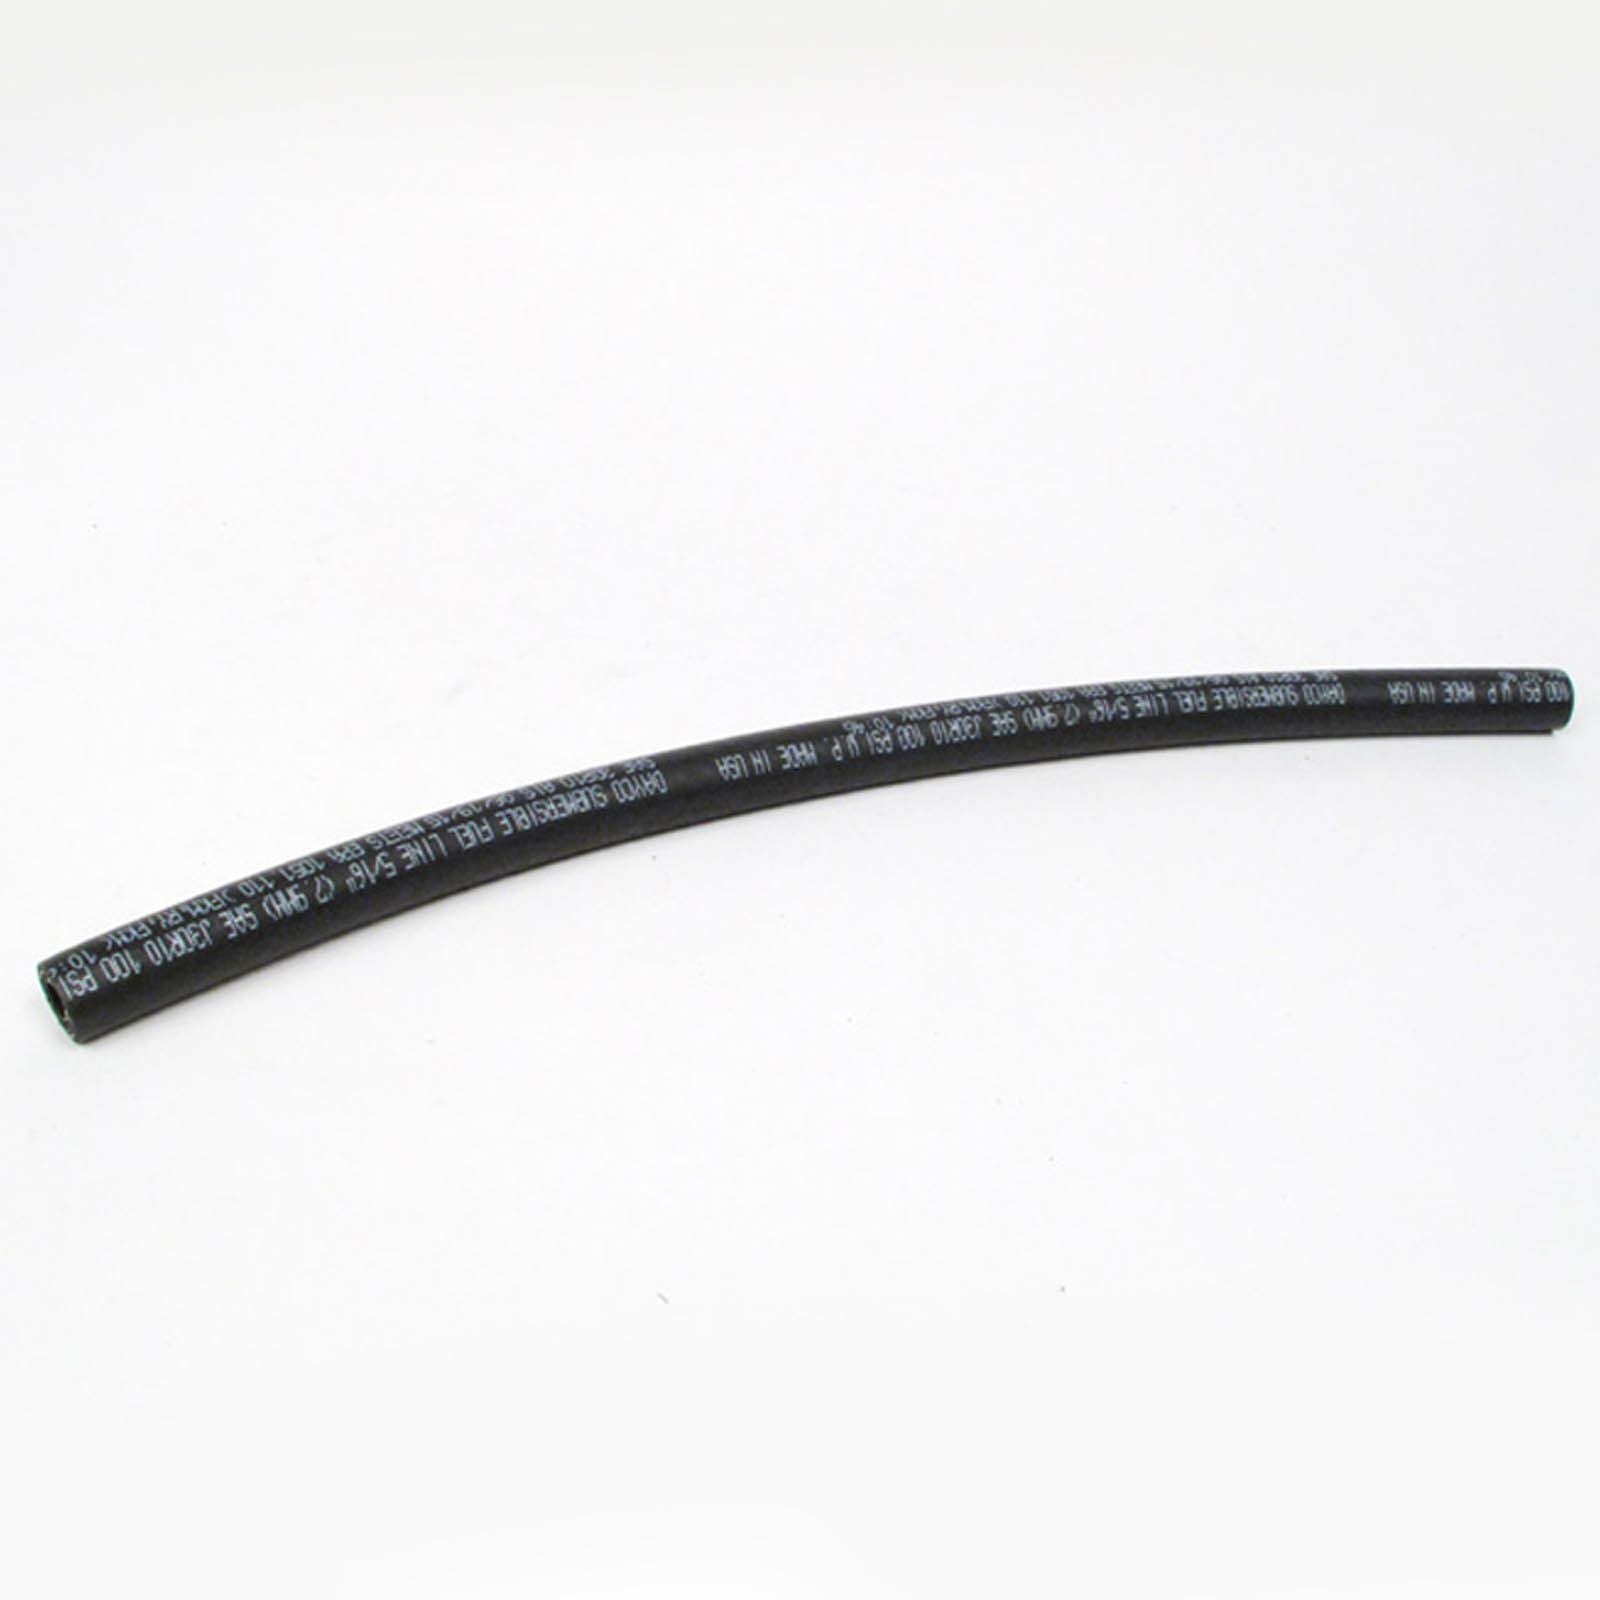 New DAYCO Submersible (Intank) Fuel Hose 8mm(0.3M) #FHDS8